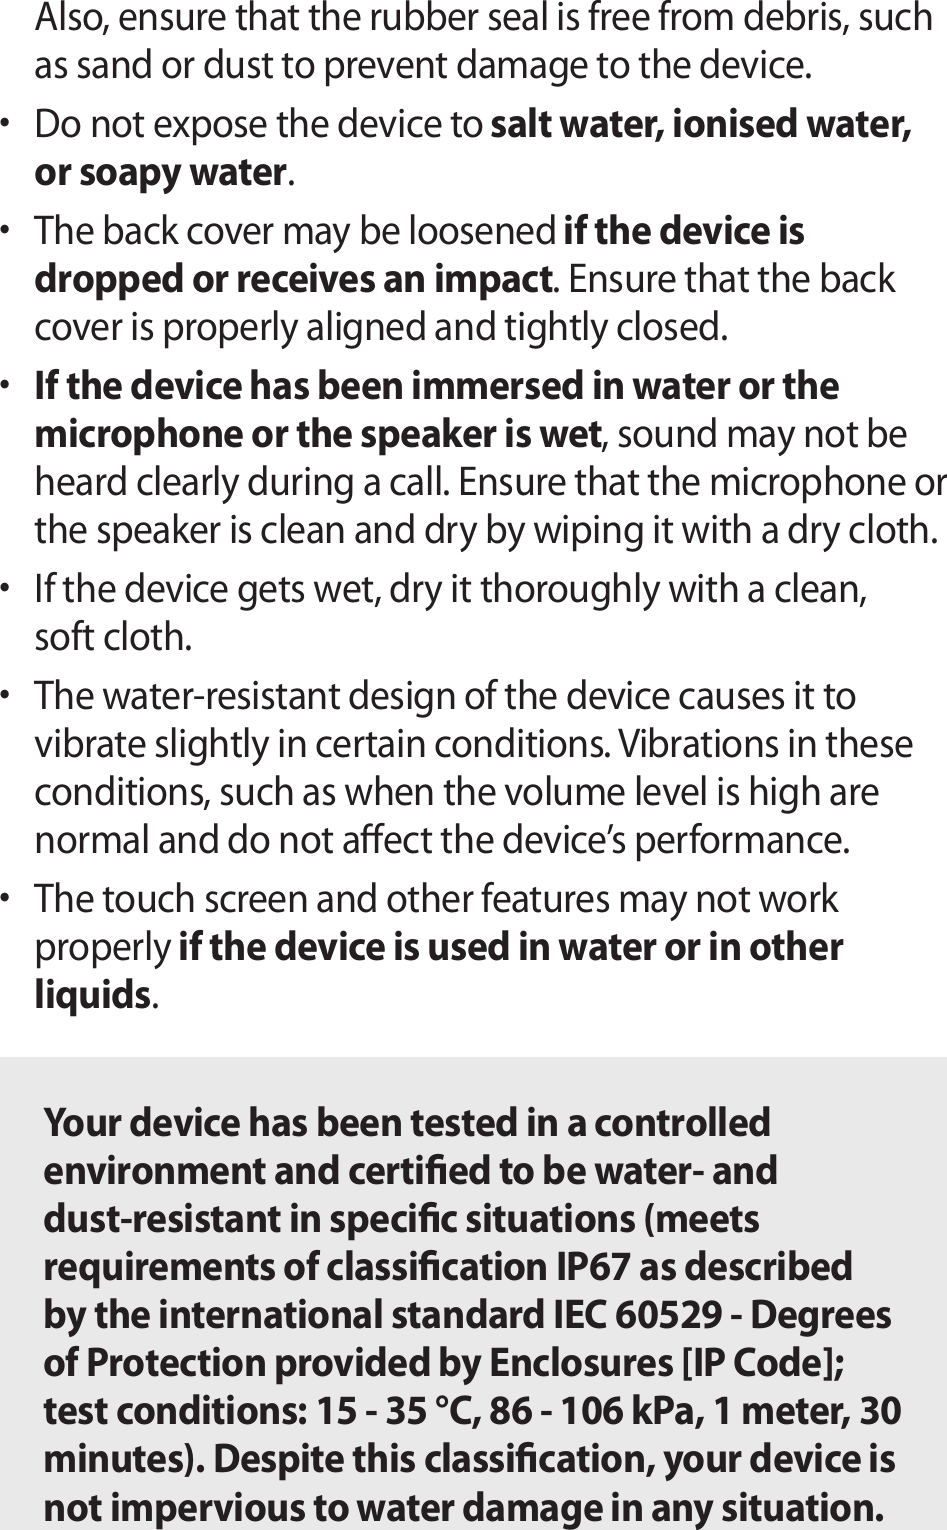 Also, ensure that the rubber seal is free from debris, such as sand or dust to prevent damage to the device.• Do not expose the device to salt water, ionised water, or soapy water.• The back cover may be loosened if the device is dropped or receives an impact. Ensure that the back cover is properly aligned and tightly closed.• If the device has been immersed in water or the microphone or the speaker is wet, sound may not be heard clearly during a call. Ensure that the microphone or the speaker is clean and dry by wiping it with a dry cloth.• If the device gets wet, dry it thoroughly with a clean, soft cloth.• The water-resistant design of the device causes it to vibrate slightly in certain conditions. Vibrations in these conditions, such as when the volume level is high are normal and do not aect the device’s performance.• The touch screen and other features may not work properly if the device is used in water or in other liquids.Your device has been tested in a controlled environment and certied to be water- and dust-resistant in specic situations (meets requirements of classication IP67 as described by the international standard IEC 60529 - Degrees of Protection provided by Enclosures [IP Code]; test conditions: 15 - 35 °C, 86 - 106 kPa, 1 meter, 30 minutes). Despite this classication, your device is not impervious to water damage in any situation.